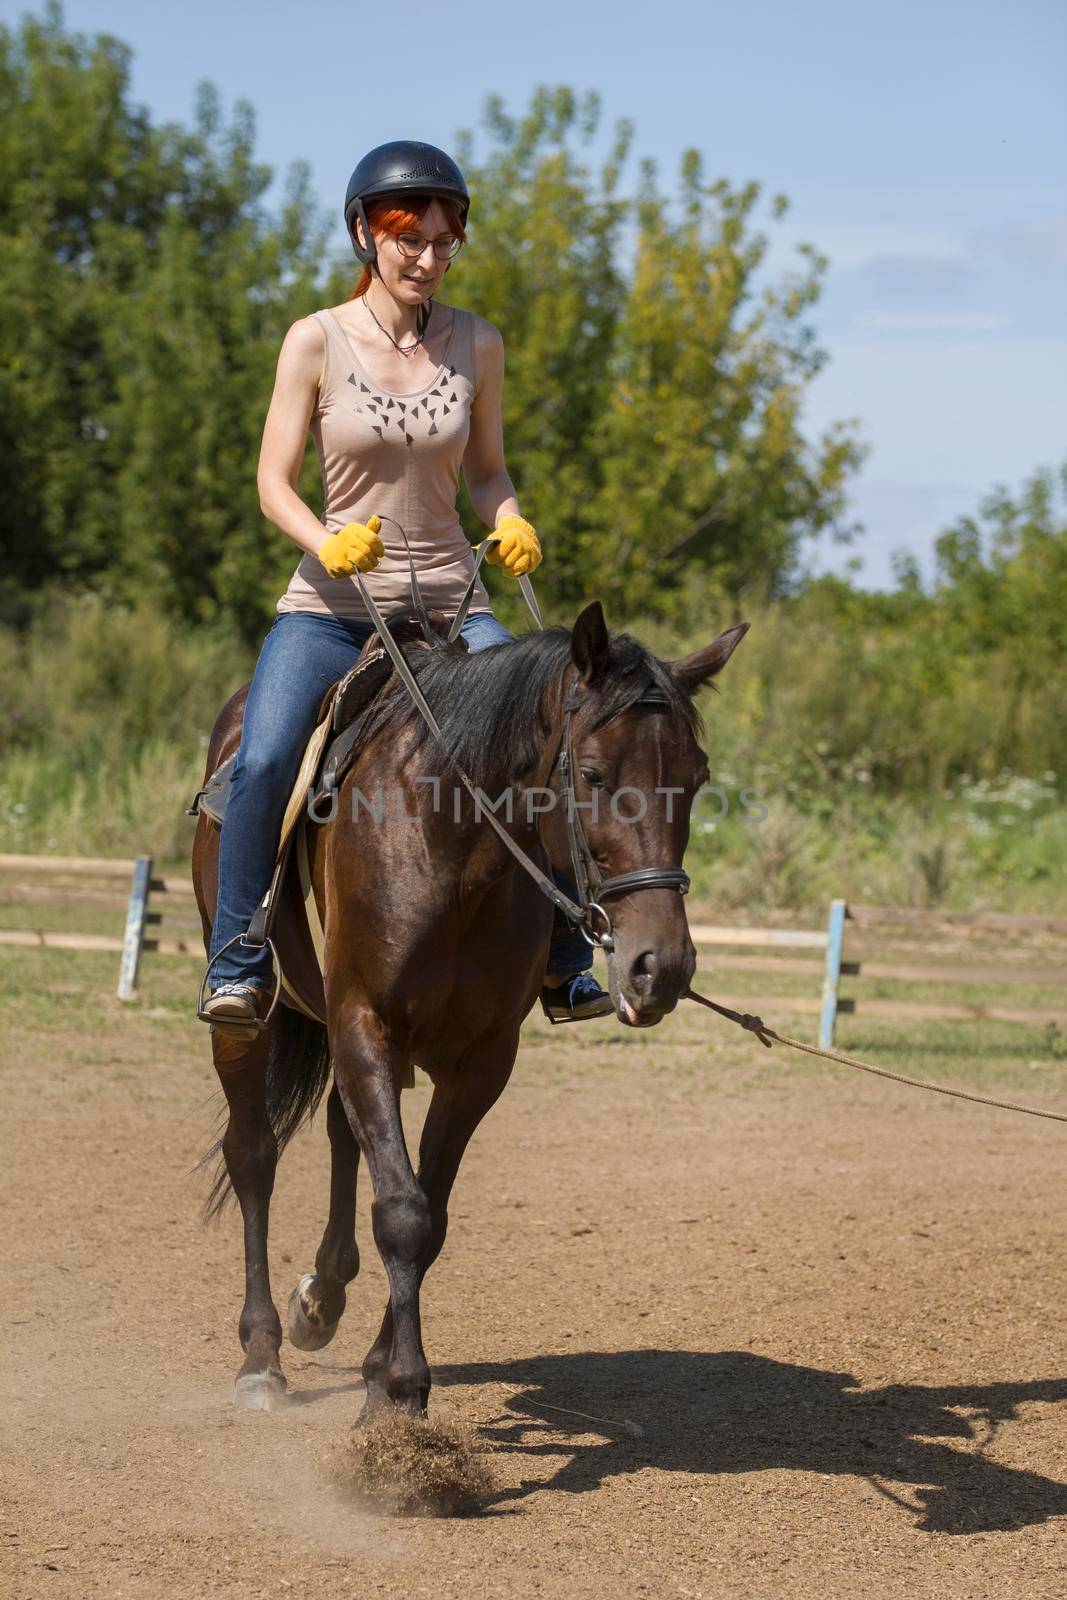 Horseback riding lessons - young woman riding a horse, vertical by Studia72